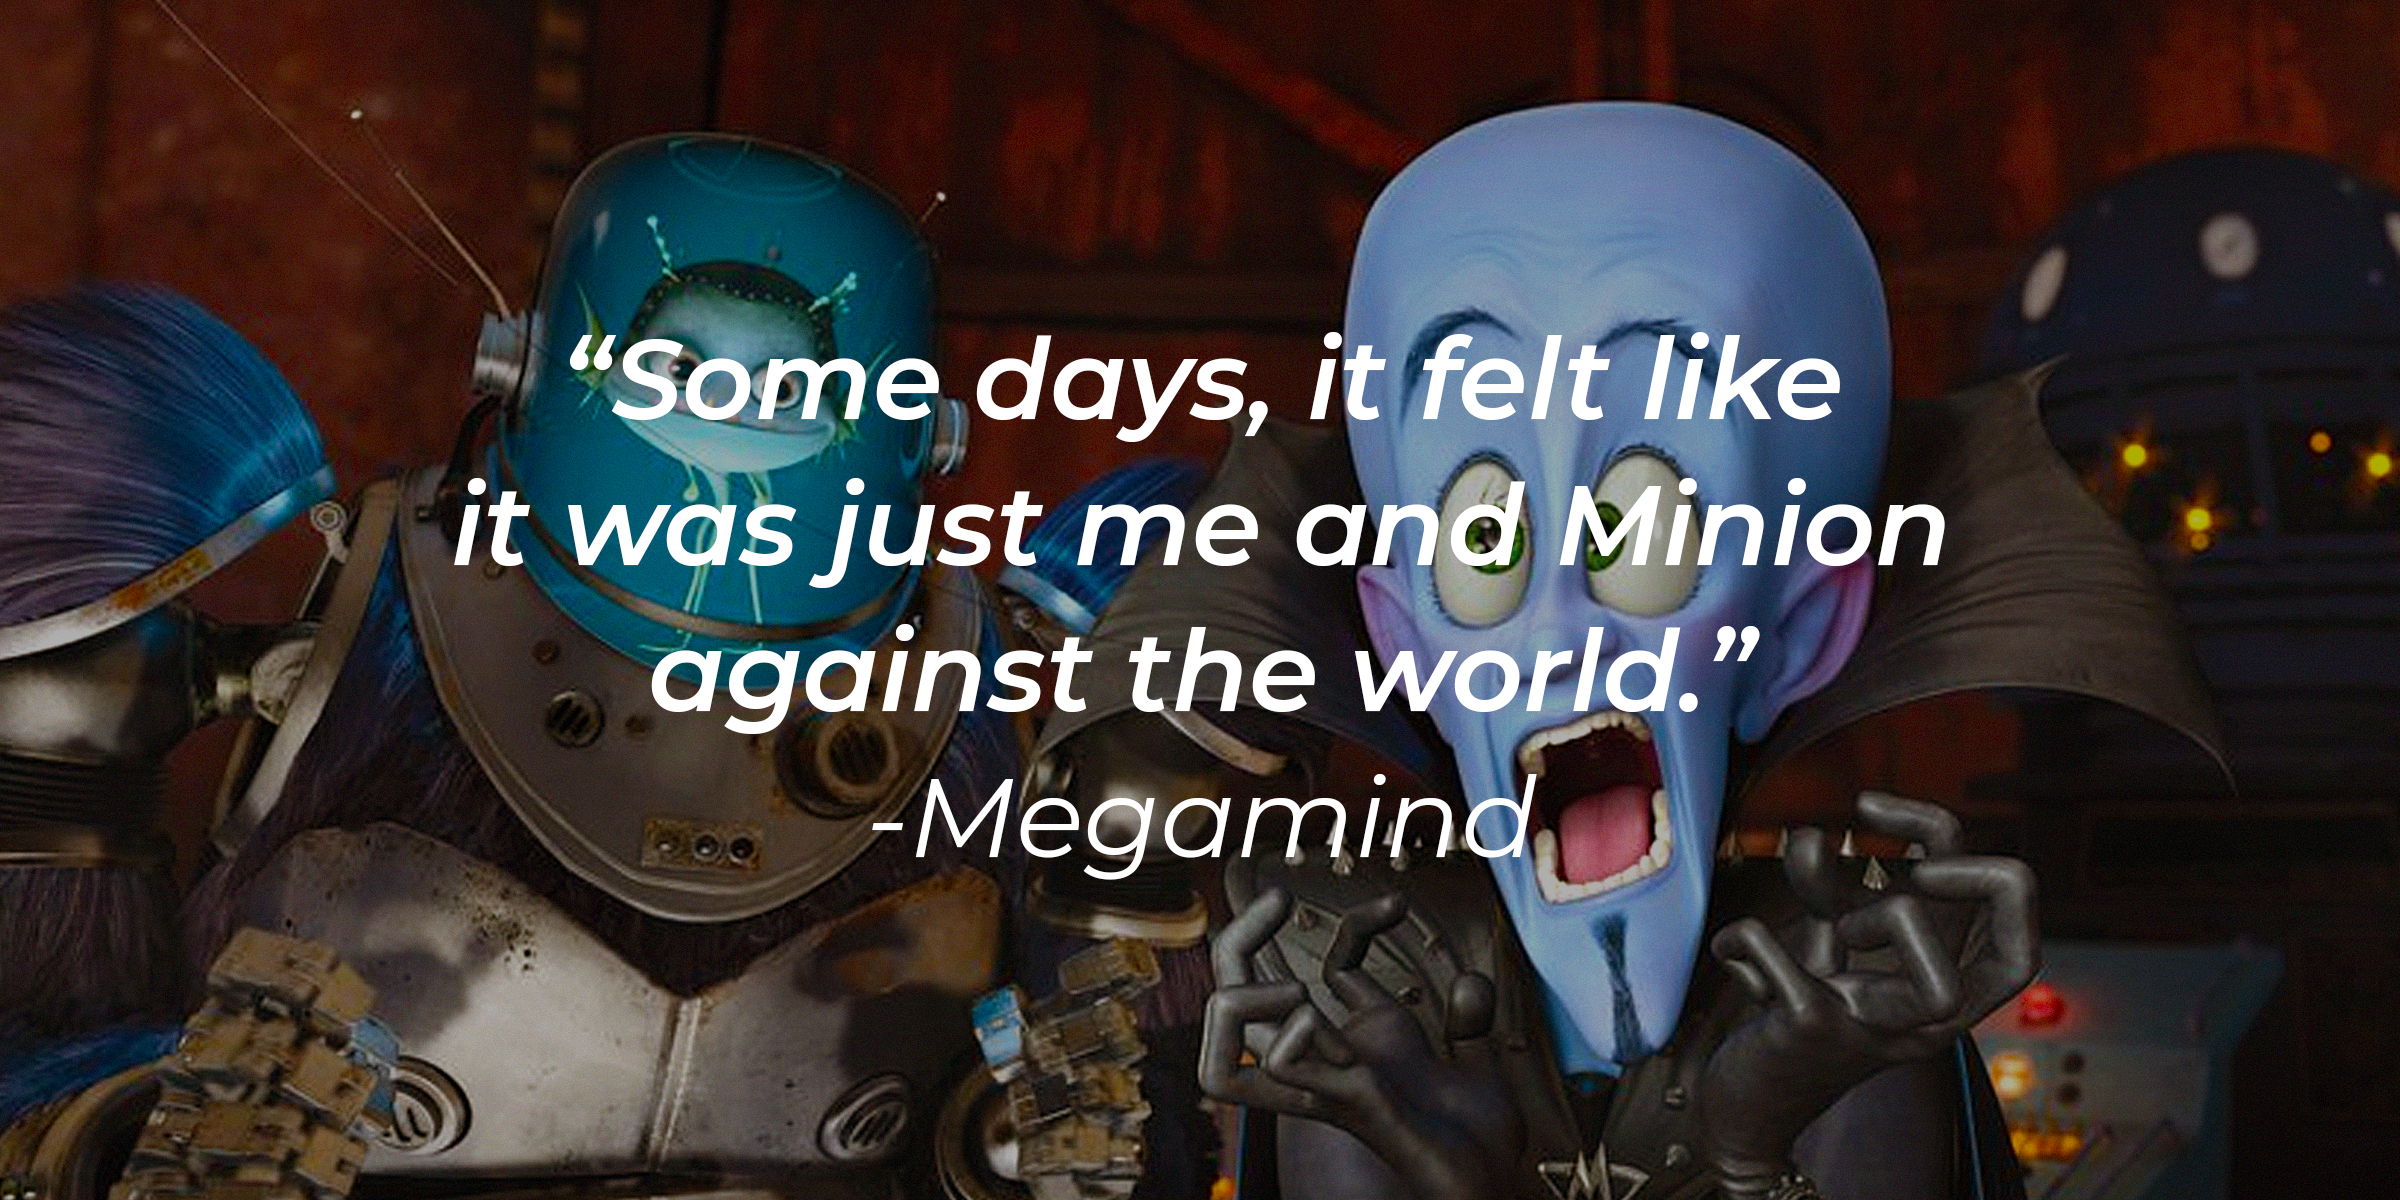 Photo of Megamind and Minion with the quote: "Some days, it felt like it was just me and Minion against the world." | Source: Facebook.com/MegamindUK